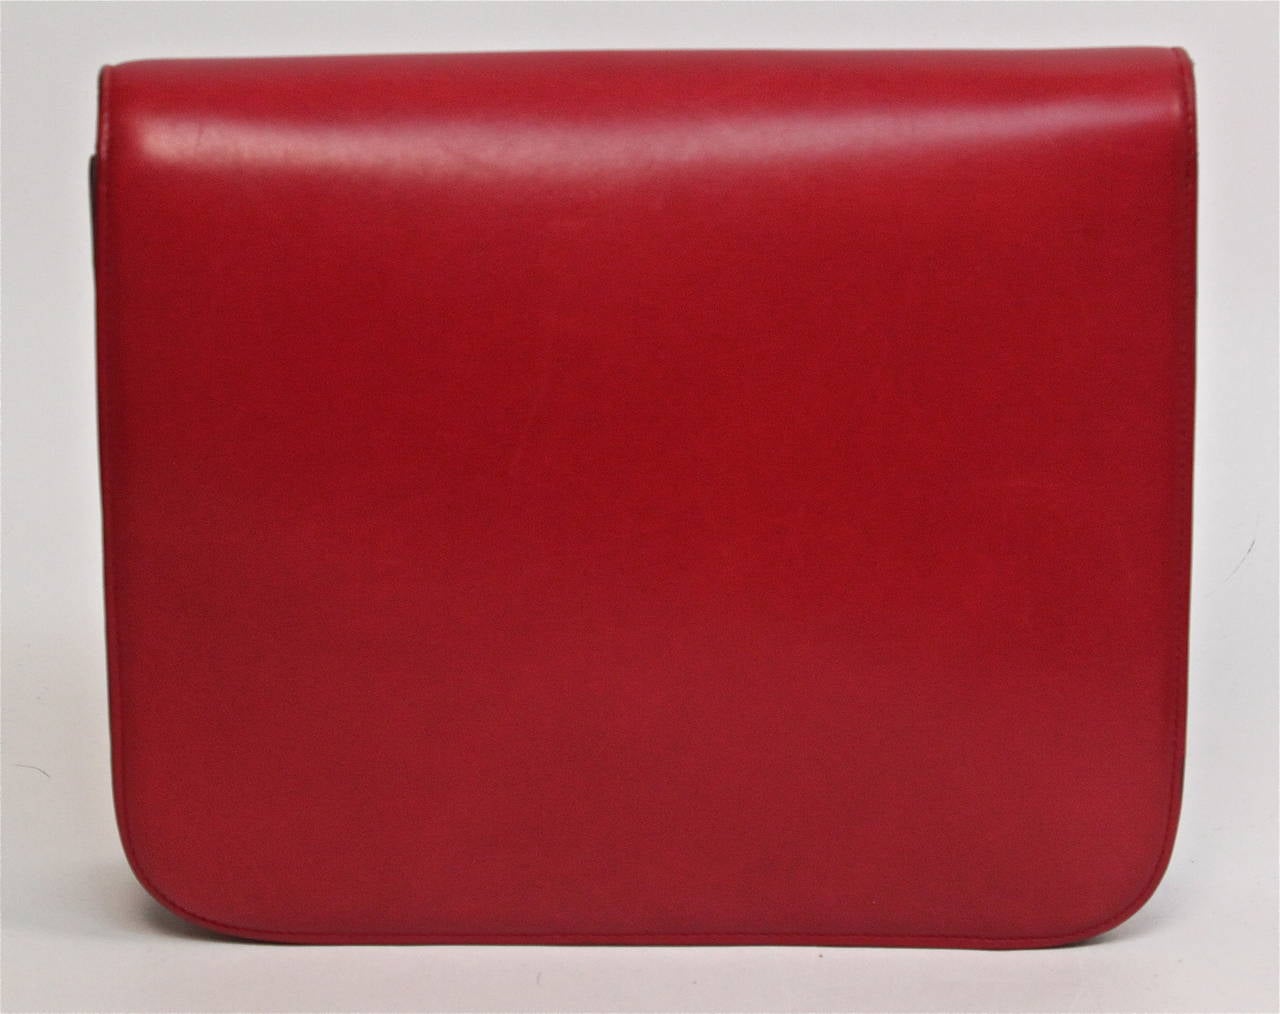 Women's Celine large red classic box leather bag with convertible strap 